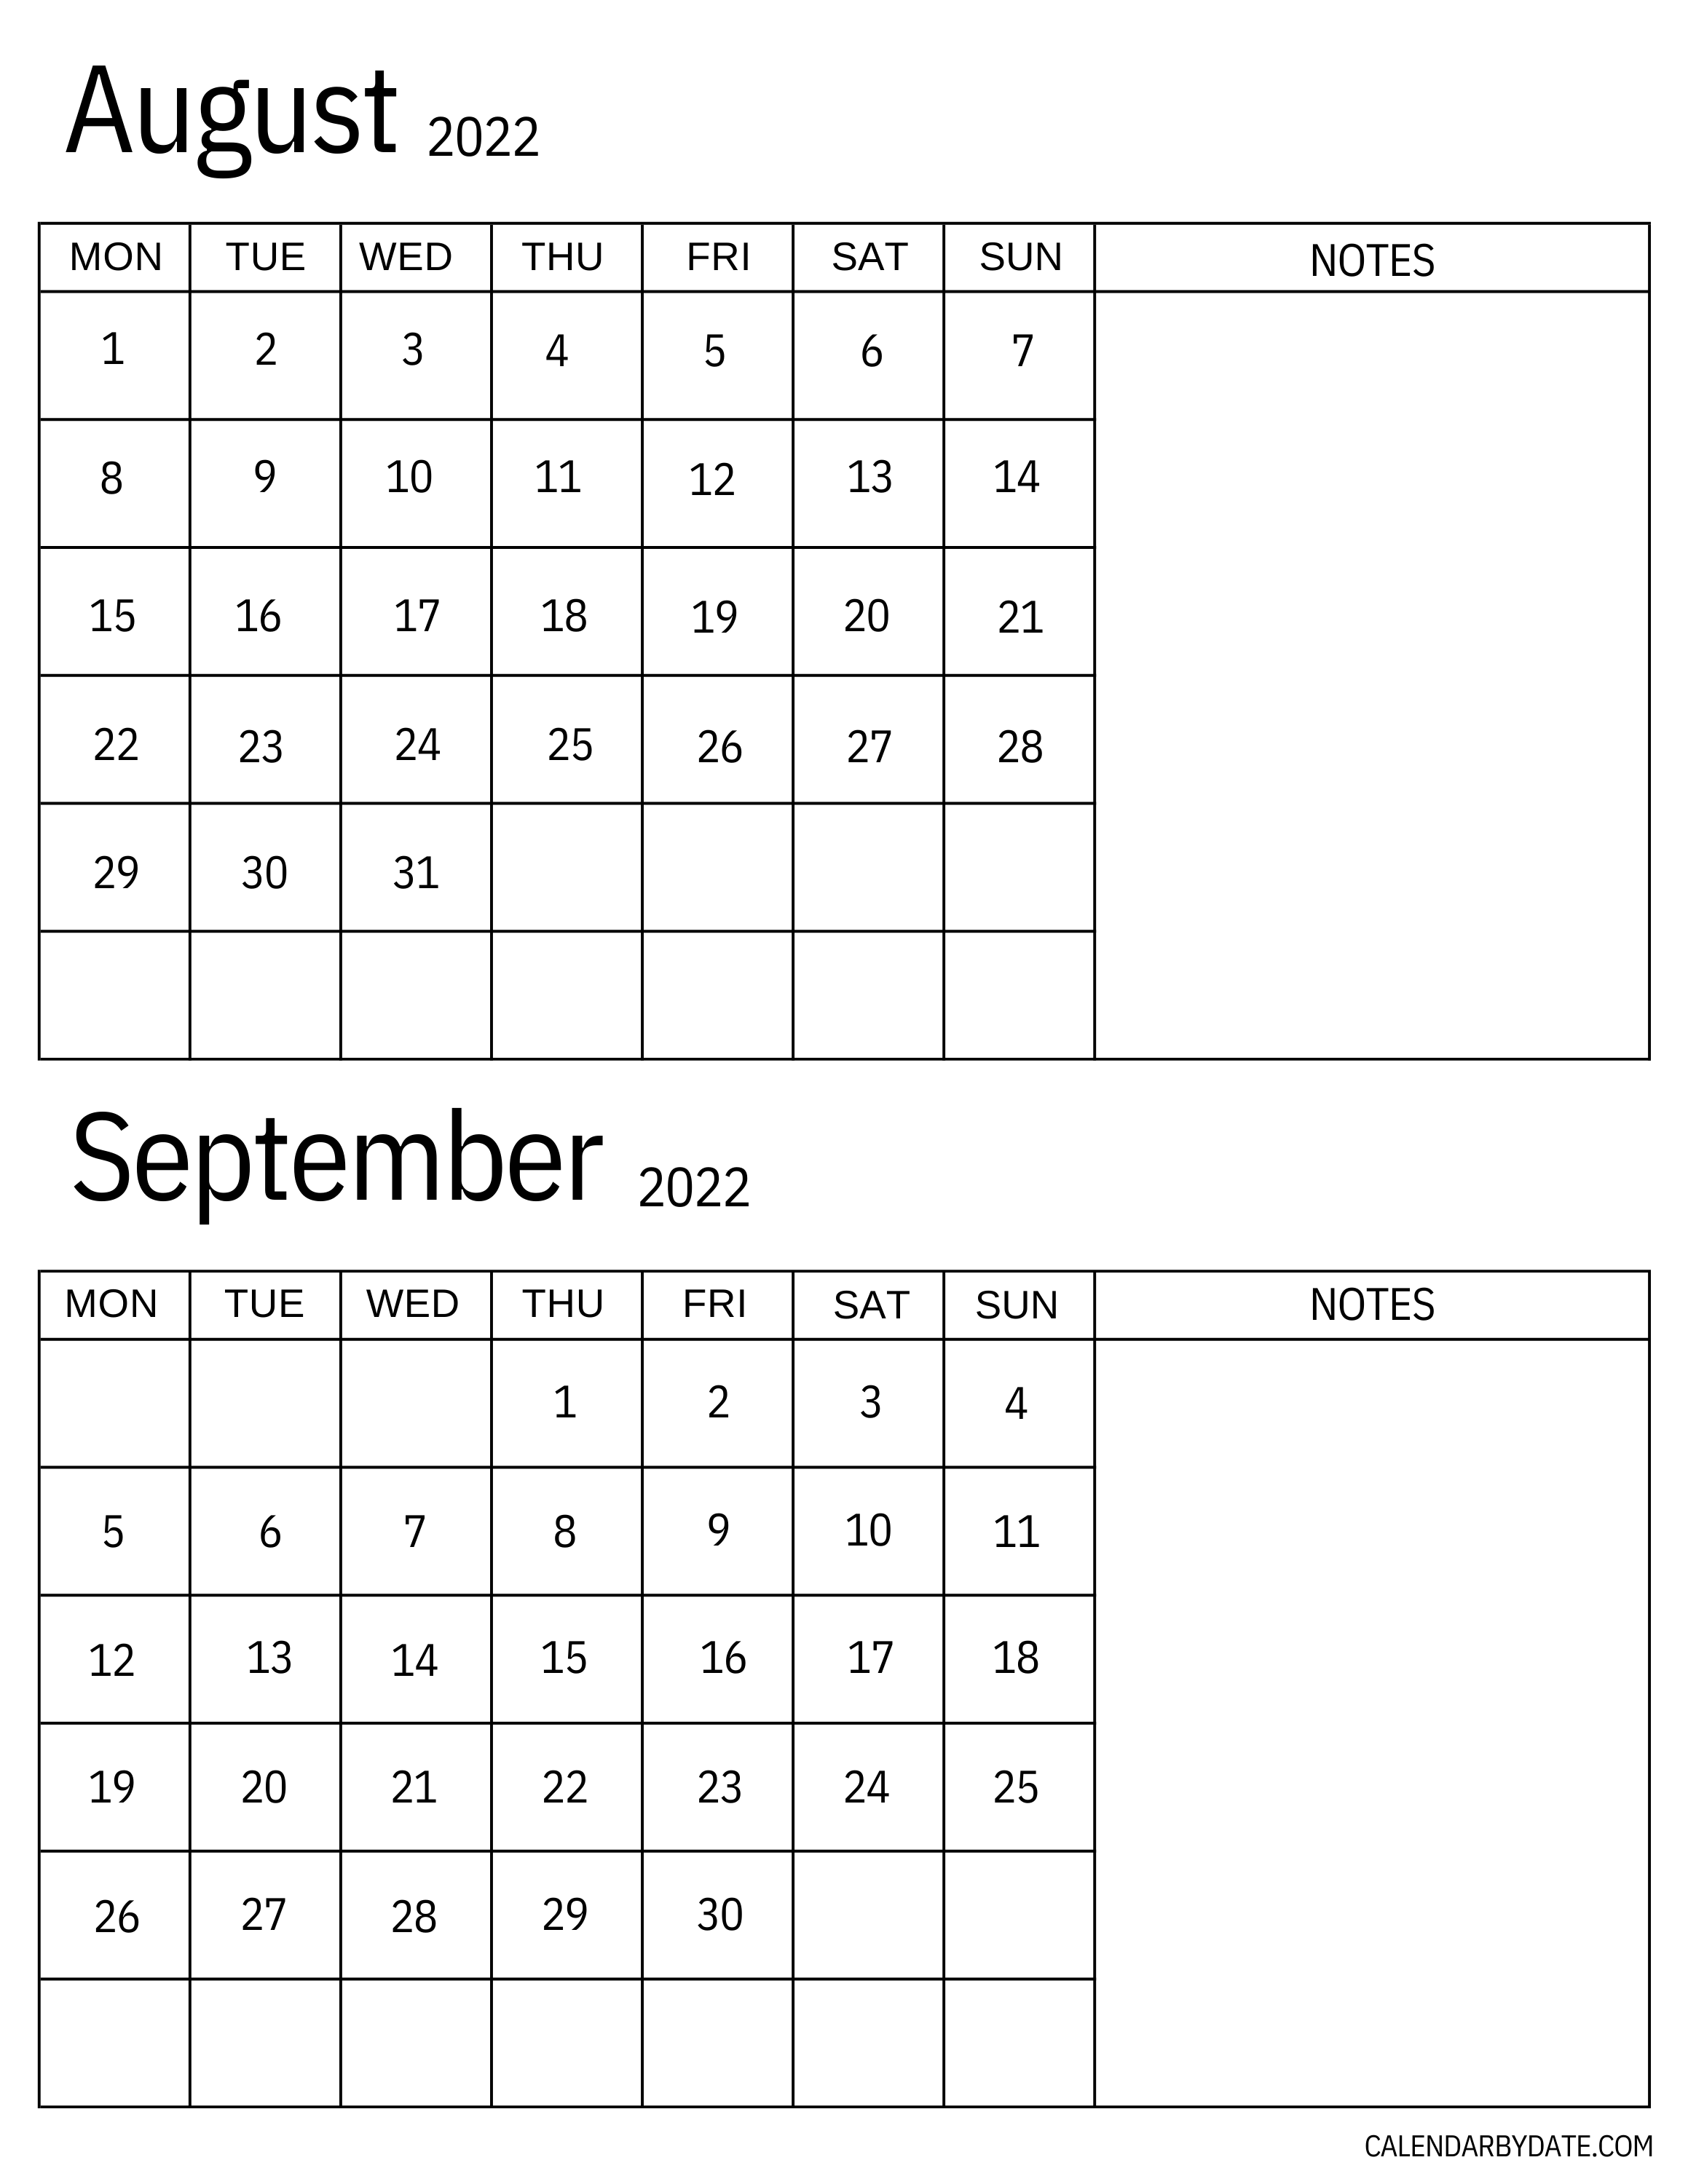 Two-month calendars August and September 2022 featuring blank notes sections for chores, activities, to-do lists, goals and schedules in each month.